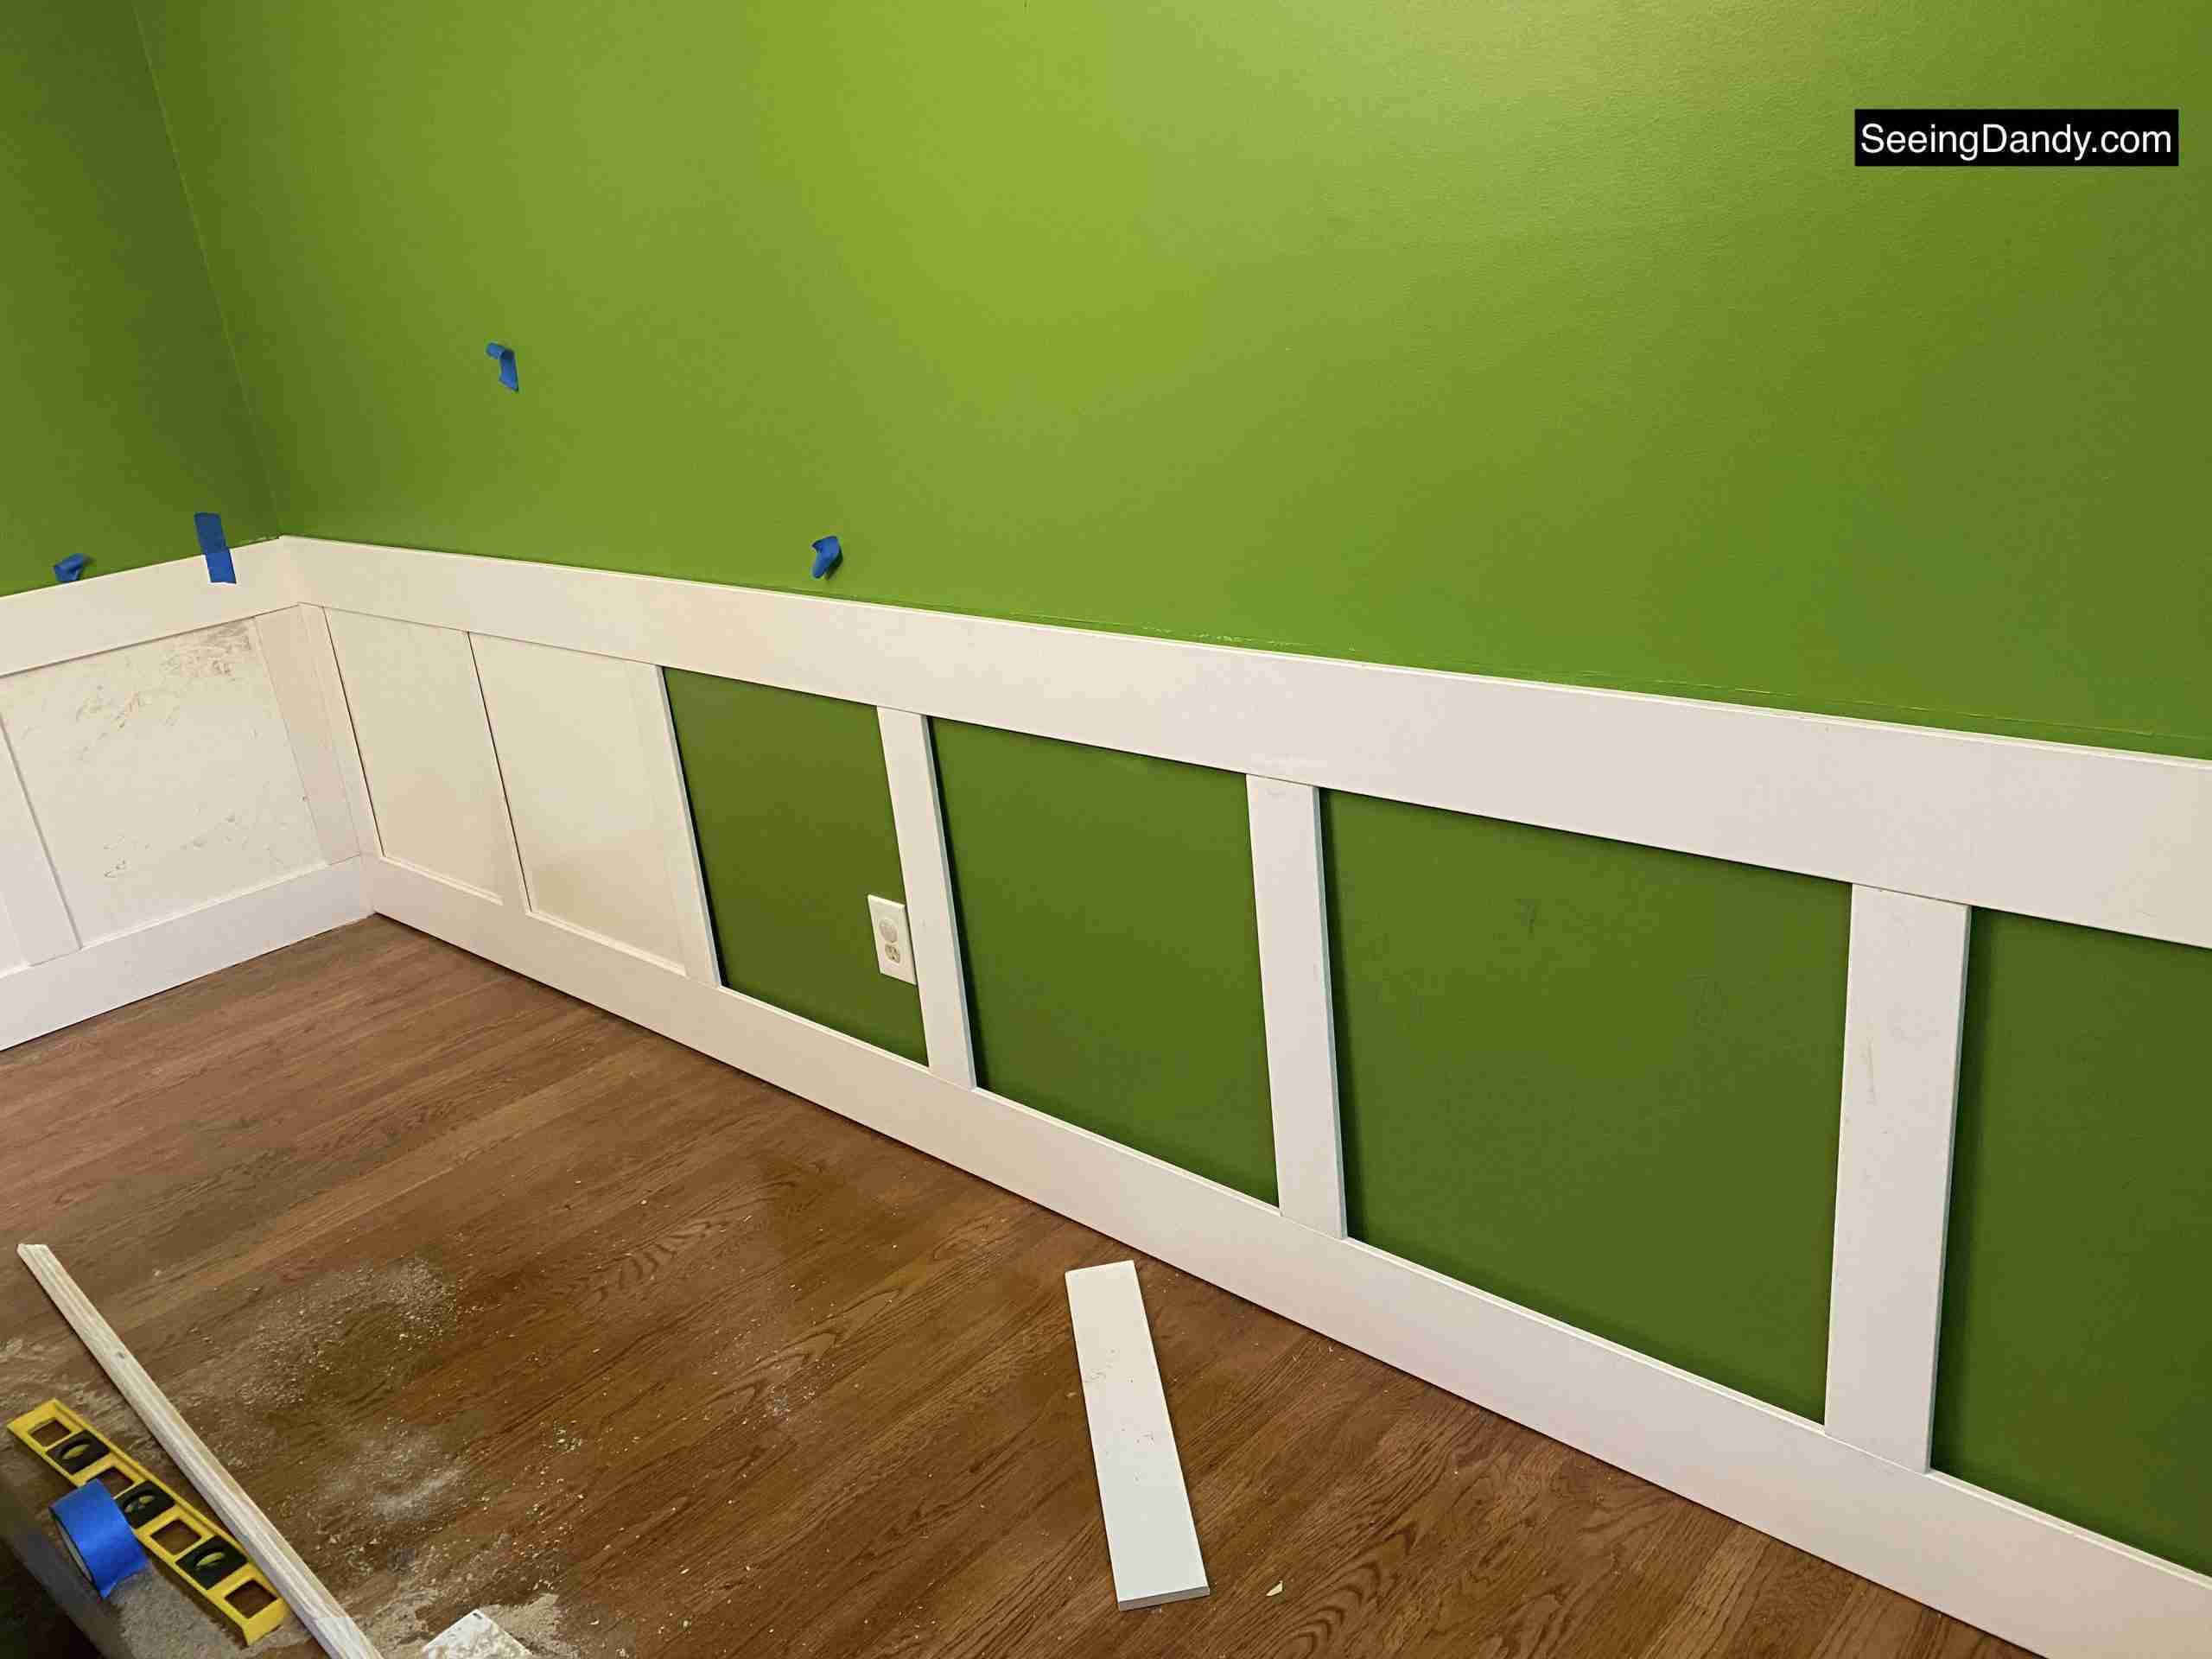 diy wainscoting, dining room wainscoting, kate spade green wall, behr paint, bold avocado green wall, square wainscoting, dining room decor, farmhouse style decorating, dining room hardwood floor 